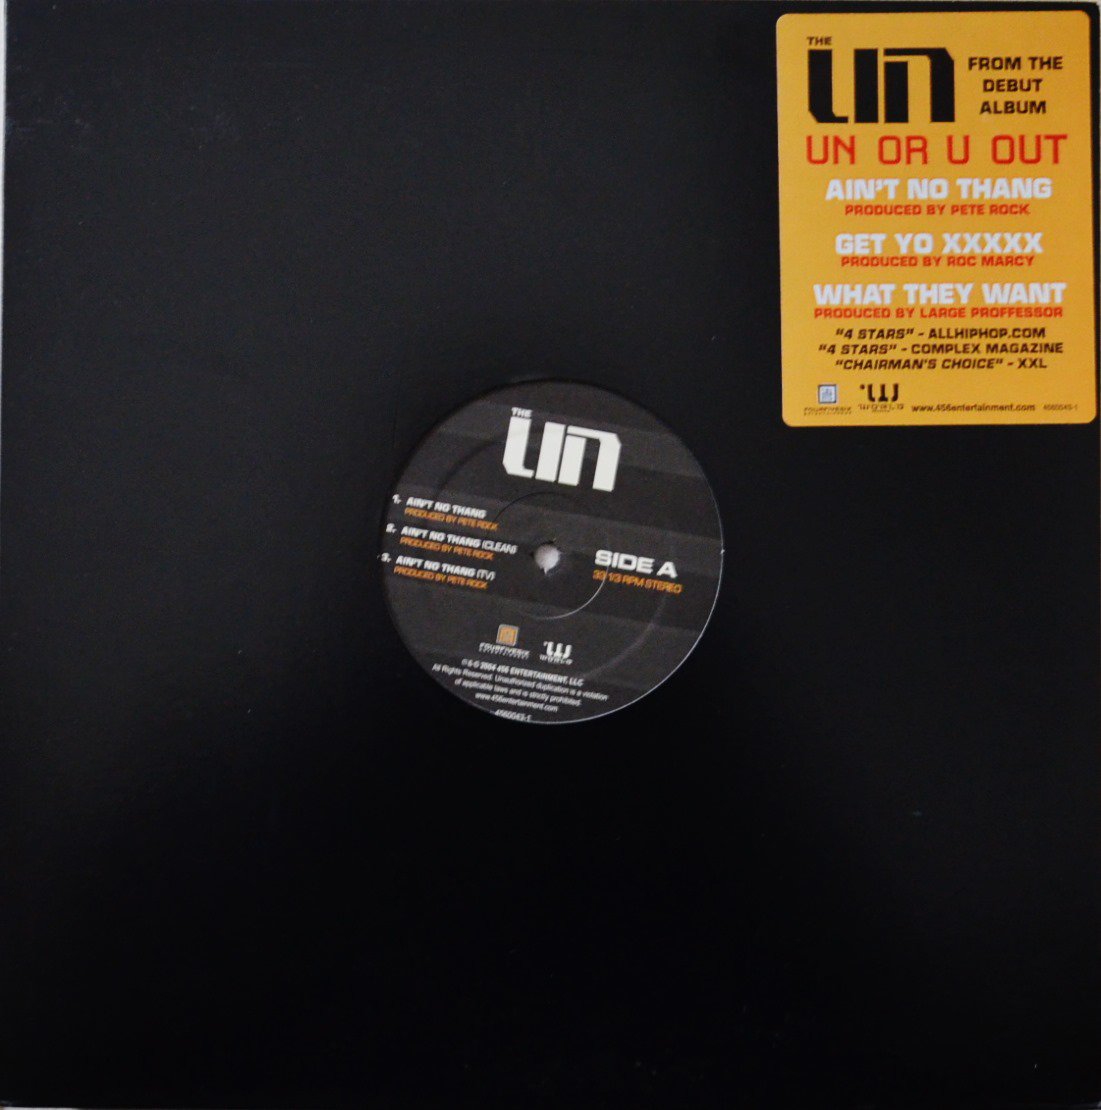 THE UN / AIN'T NO THANG (PRO PETE ROCK)  / WHAT THEY WANT (PRO LARGE PRO) (12